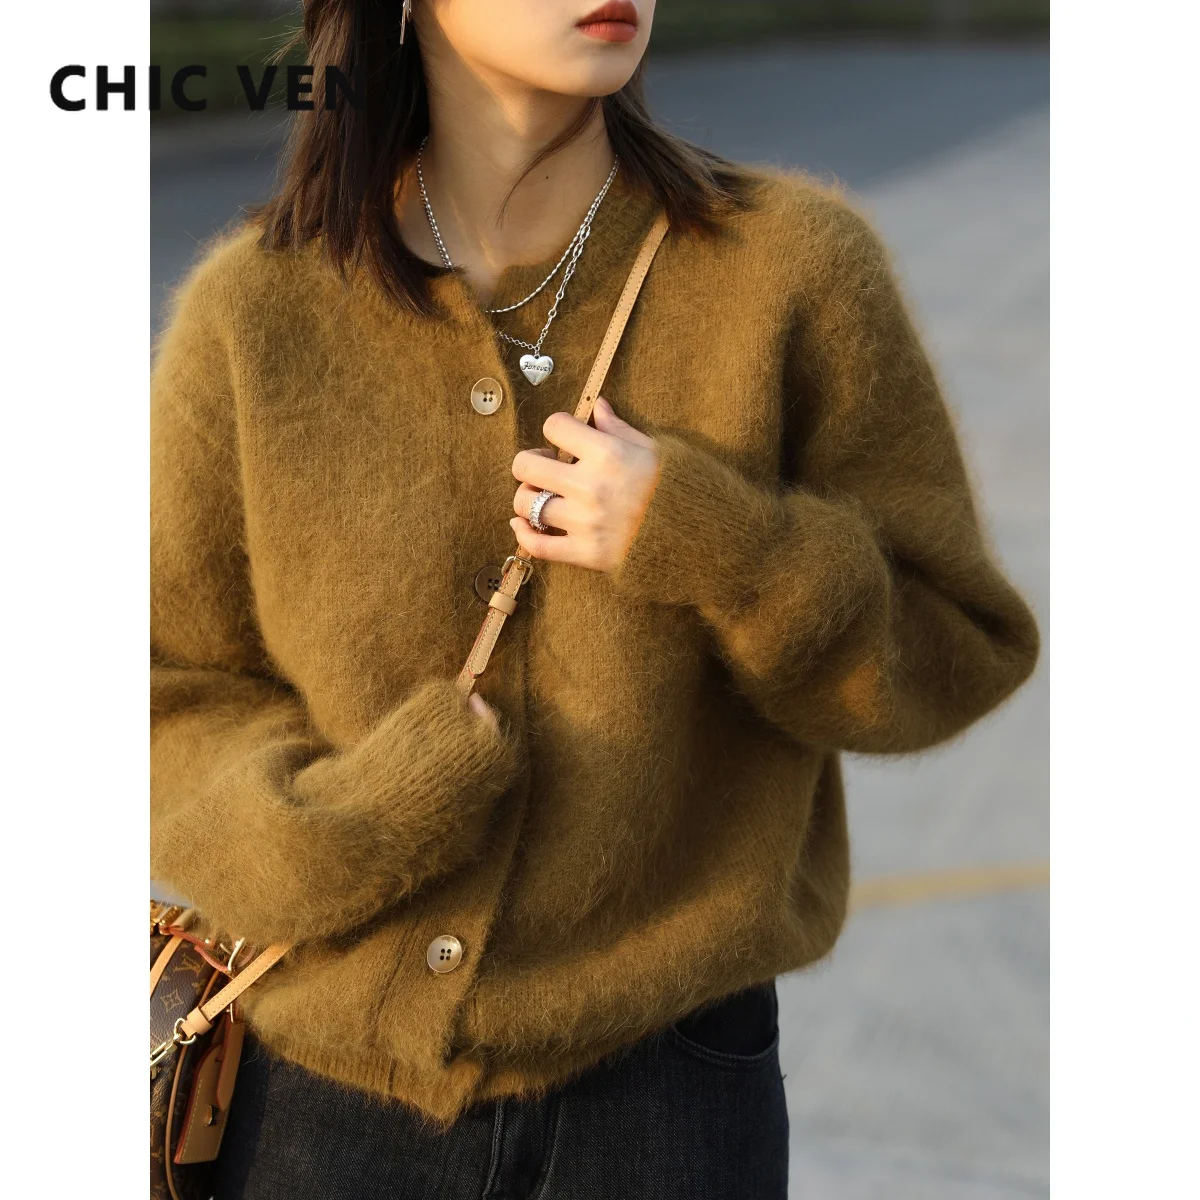 CHIC VEN Korean Fashion Women Cardigan Solid Color Round Neck Vintage Plush Women's Knitted Rabbit Hair Sweater Tops Woman Cloth